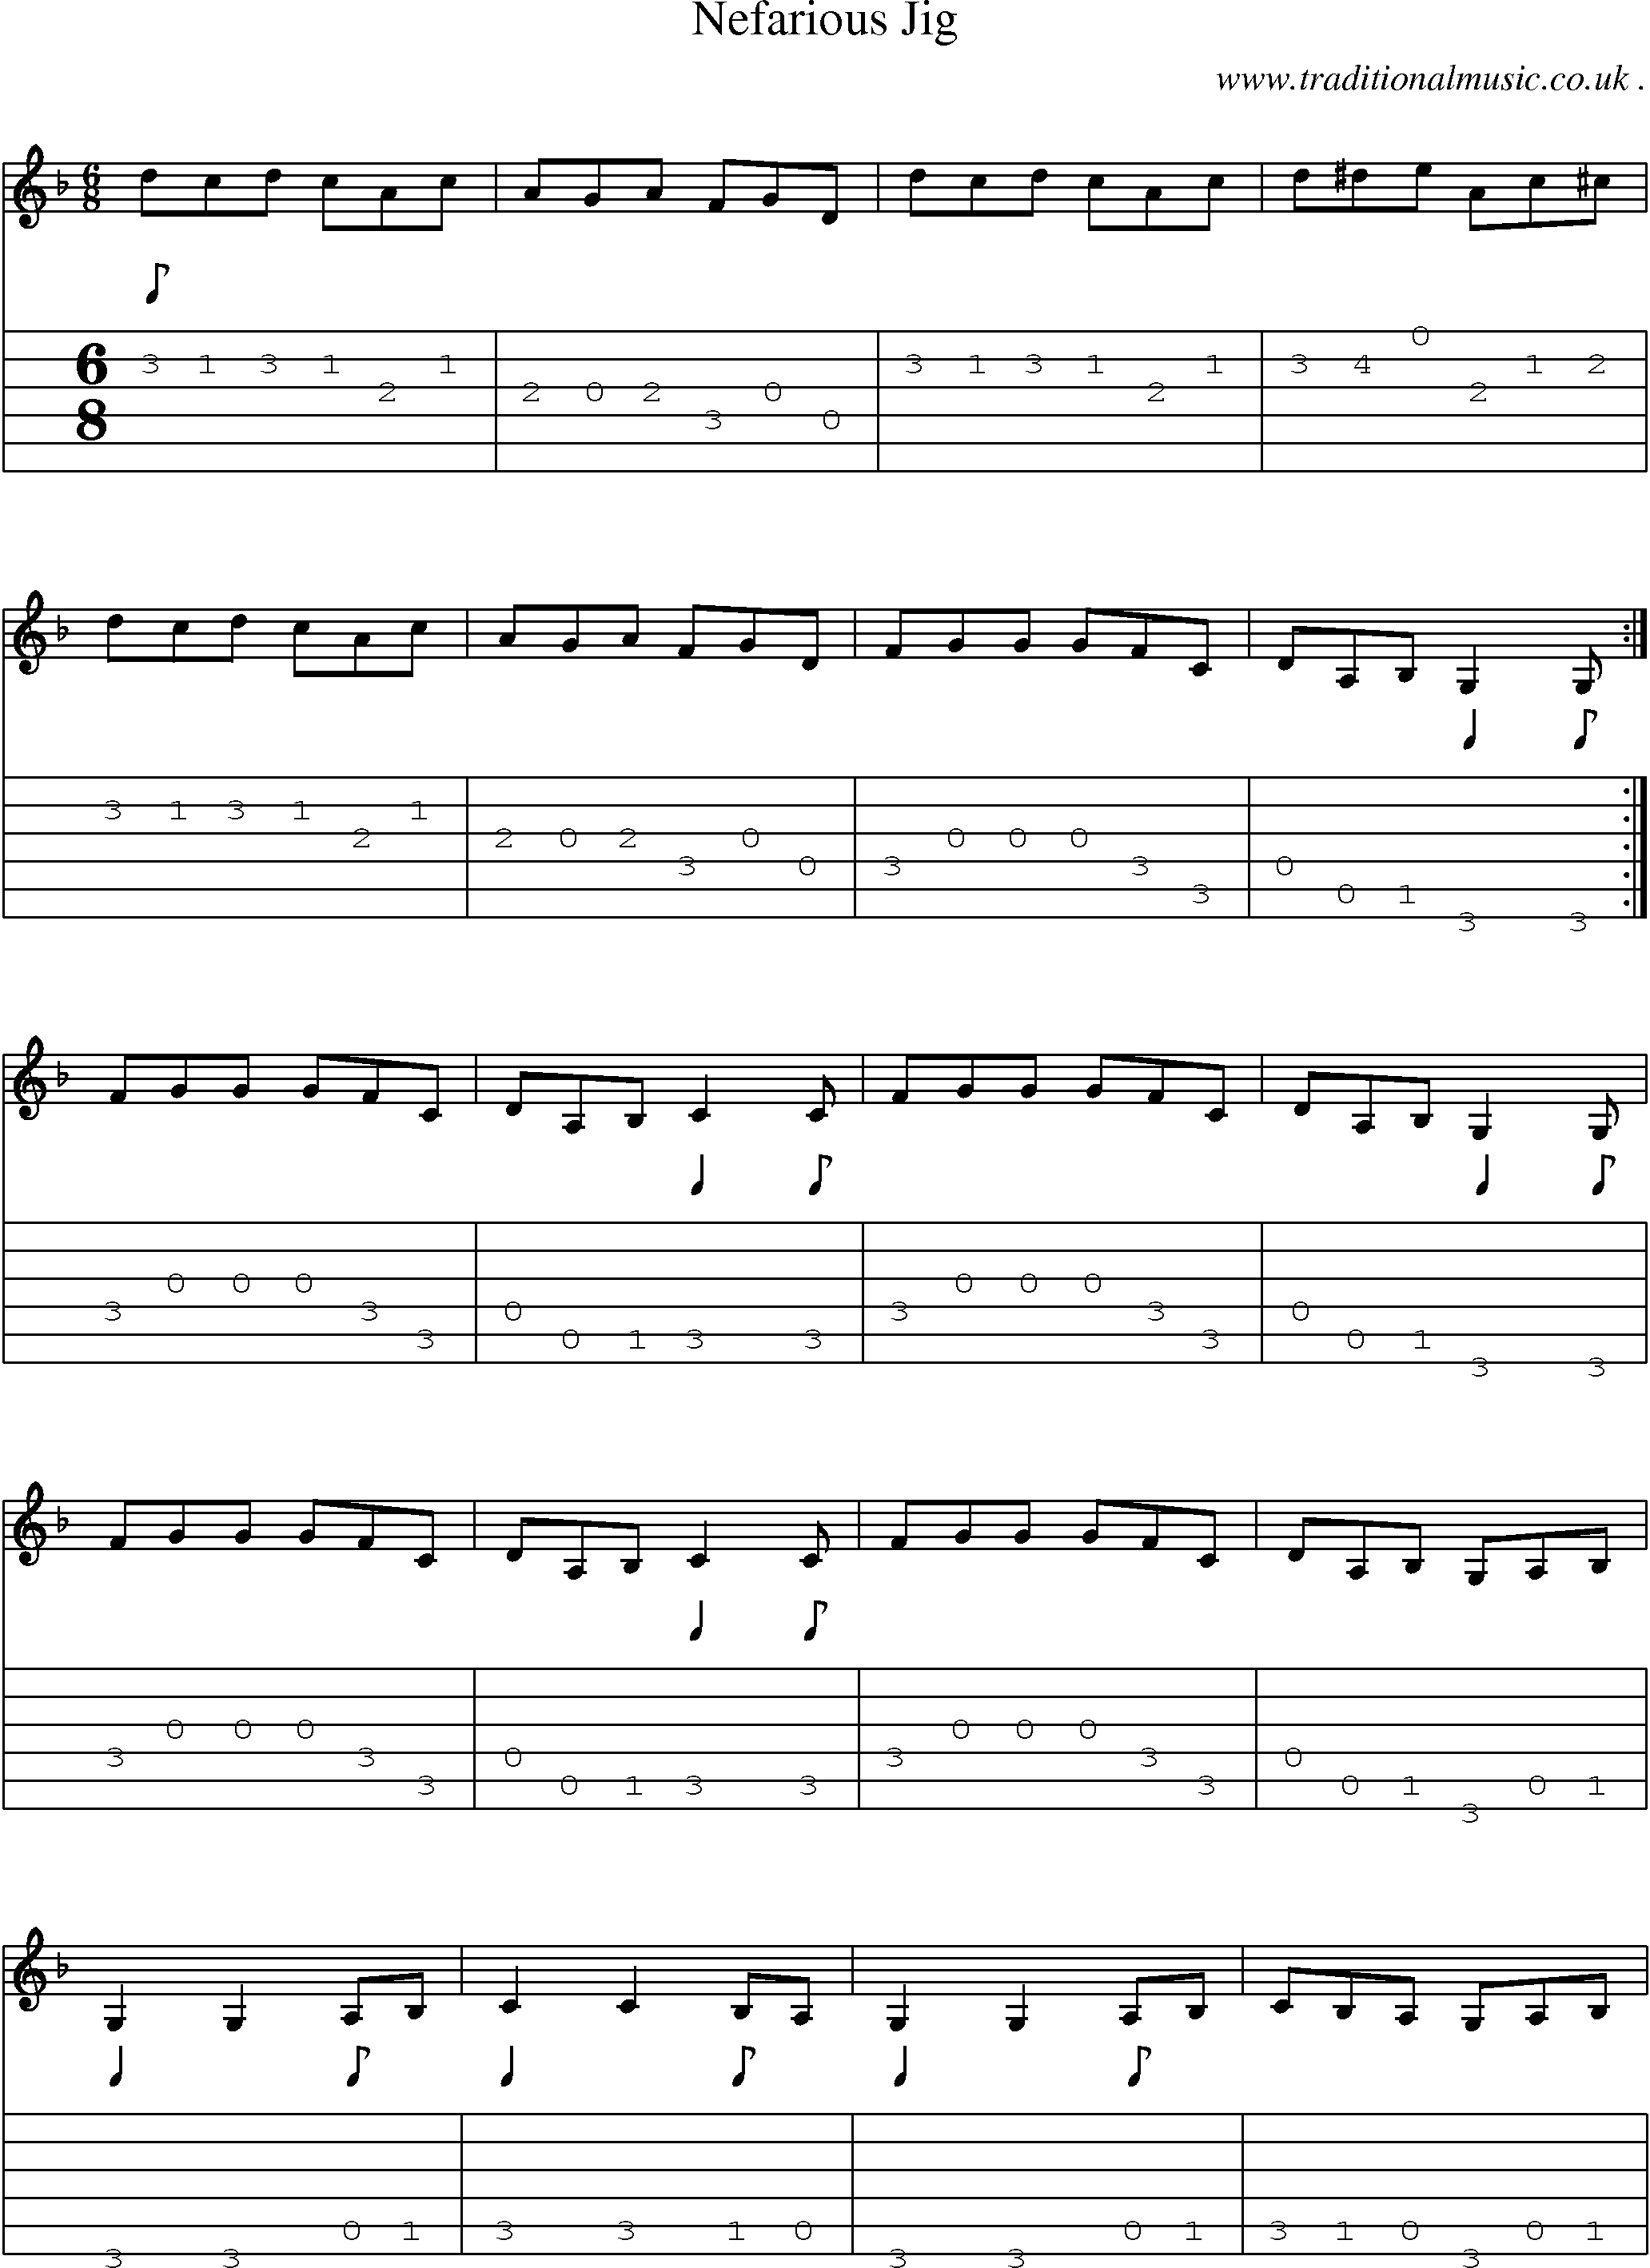 Sheet-Music and Guitar Tabs for Nefarious Jig